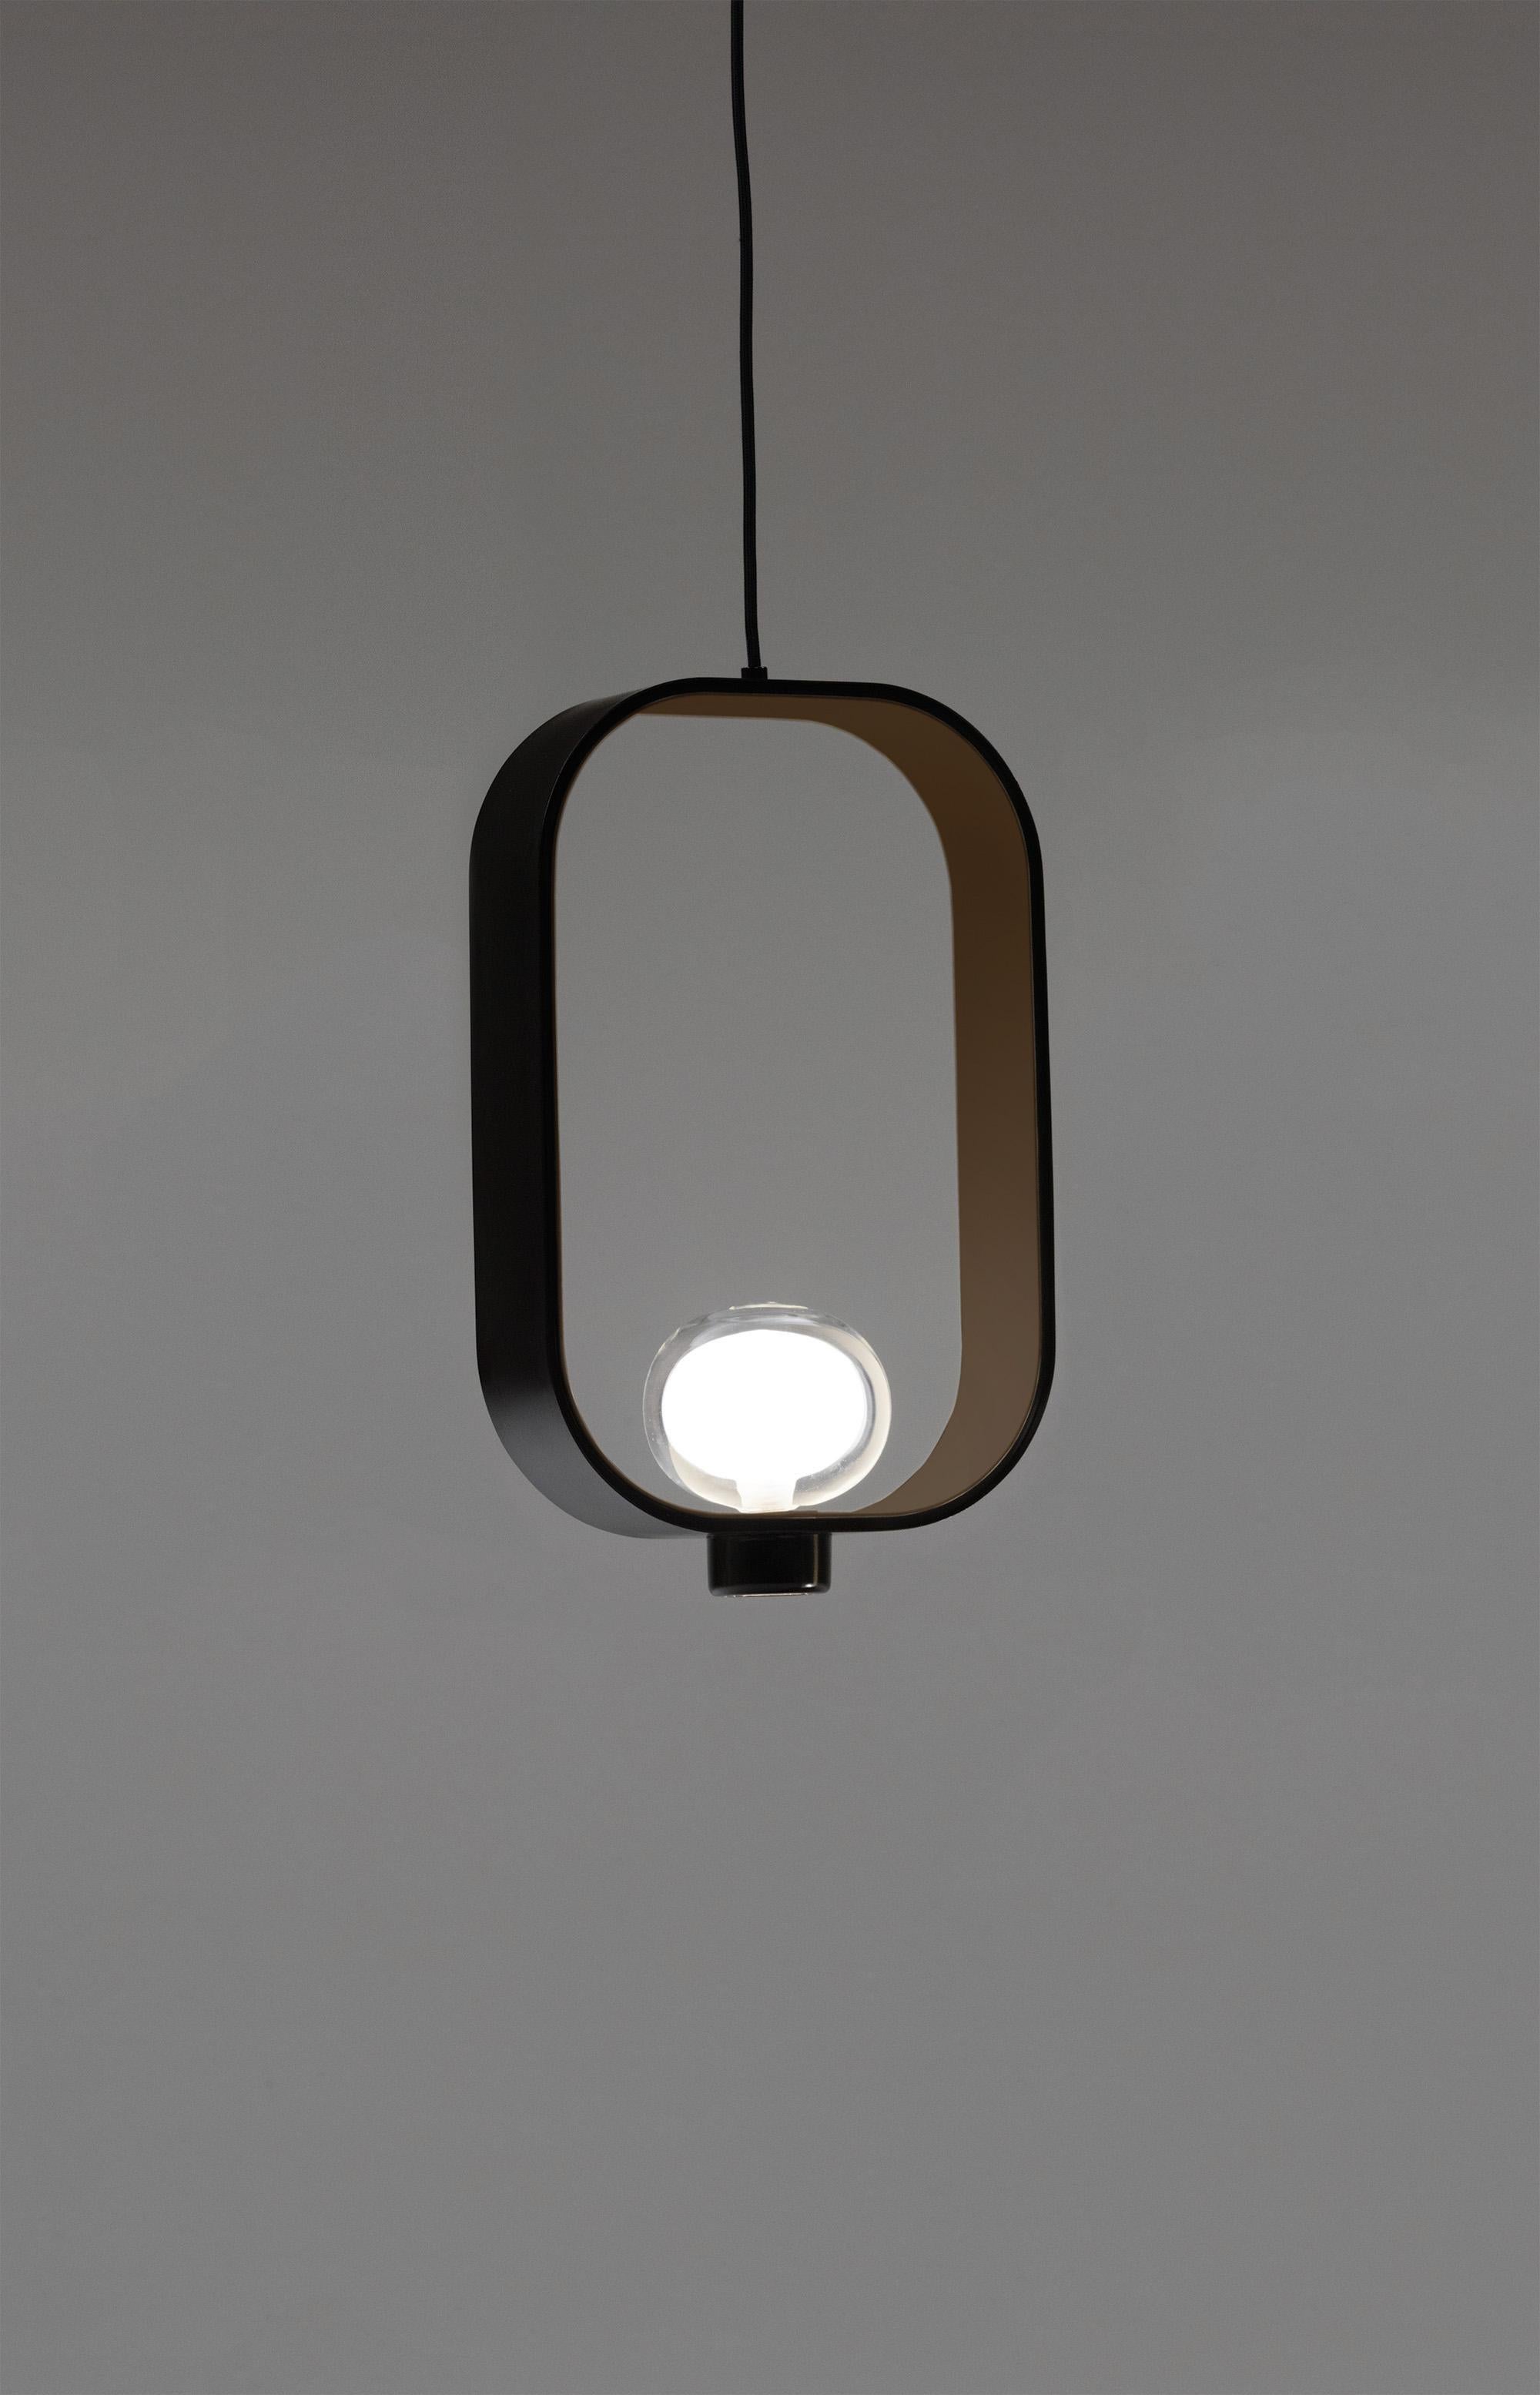 Inspired by the classic Chinese lanterns, the particular bi-dimensional structure is made by powder coated painted metal on the outside, while the inside color is sand grey. The light source is located inside a double-side borosilicate glass